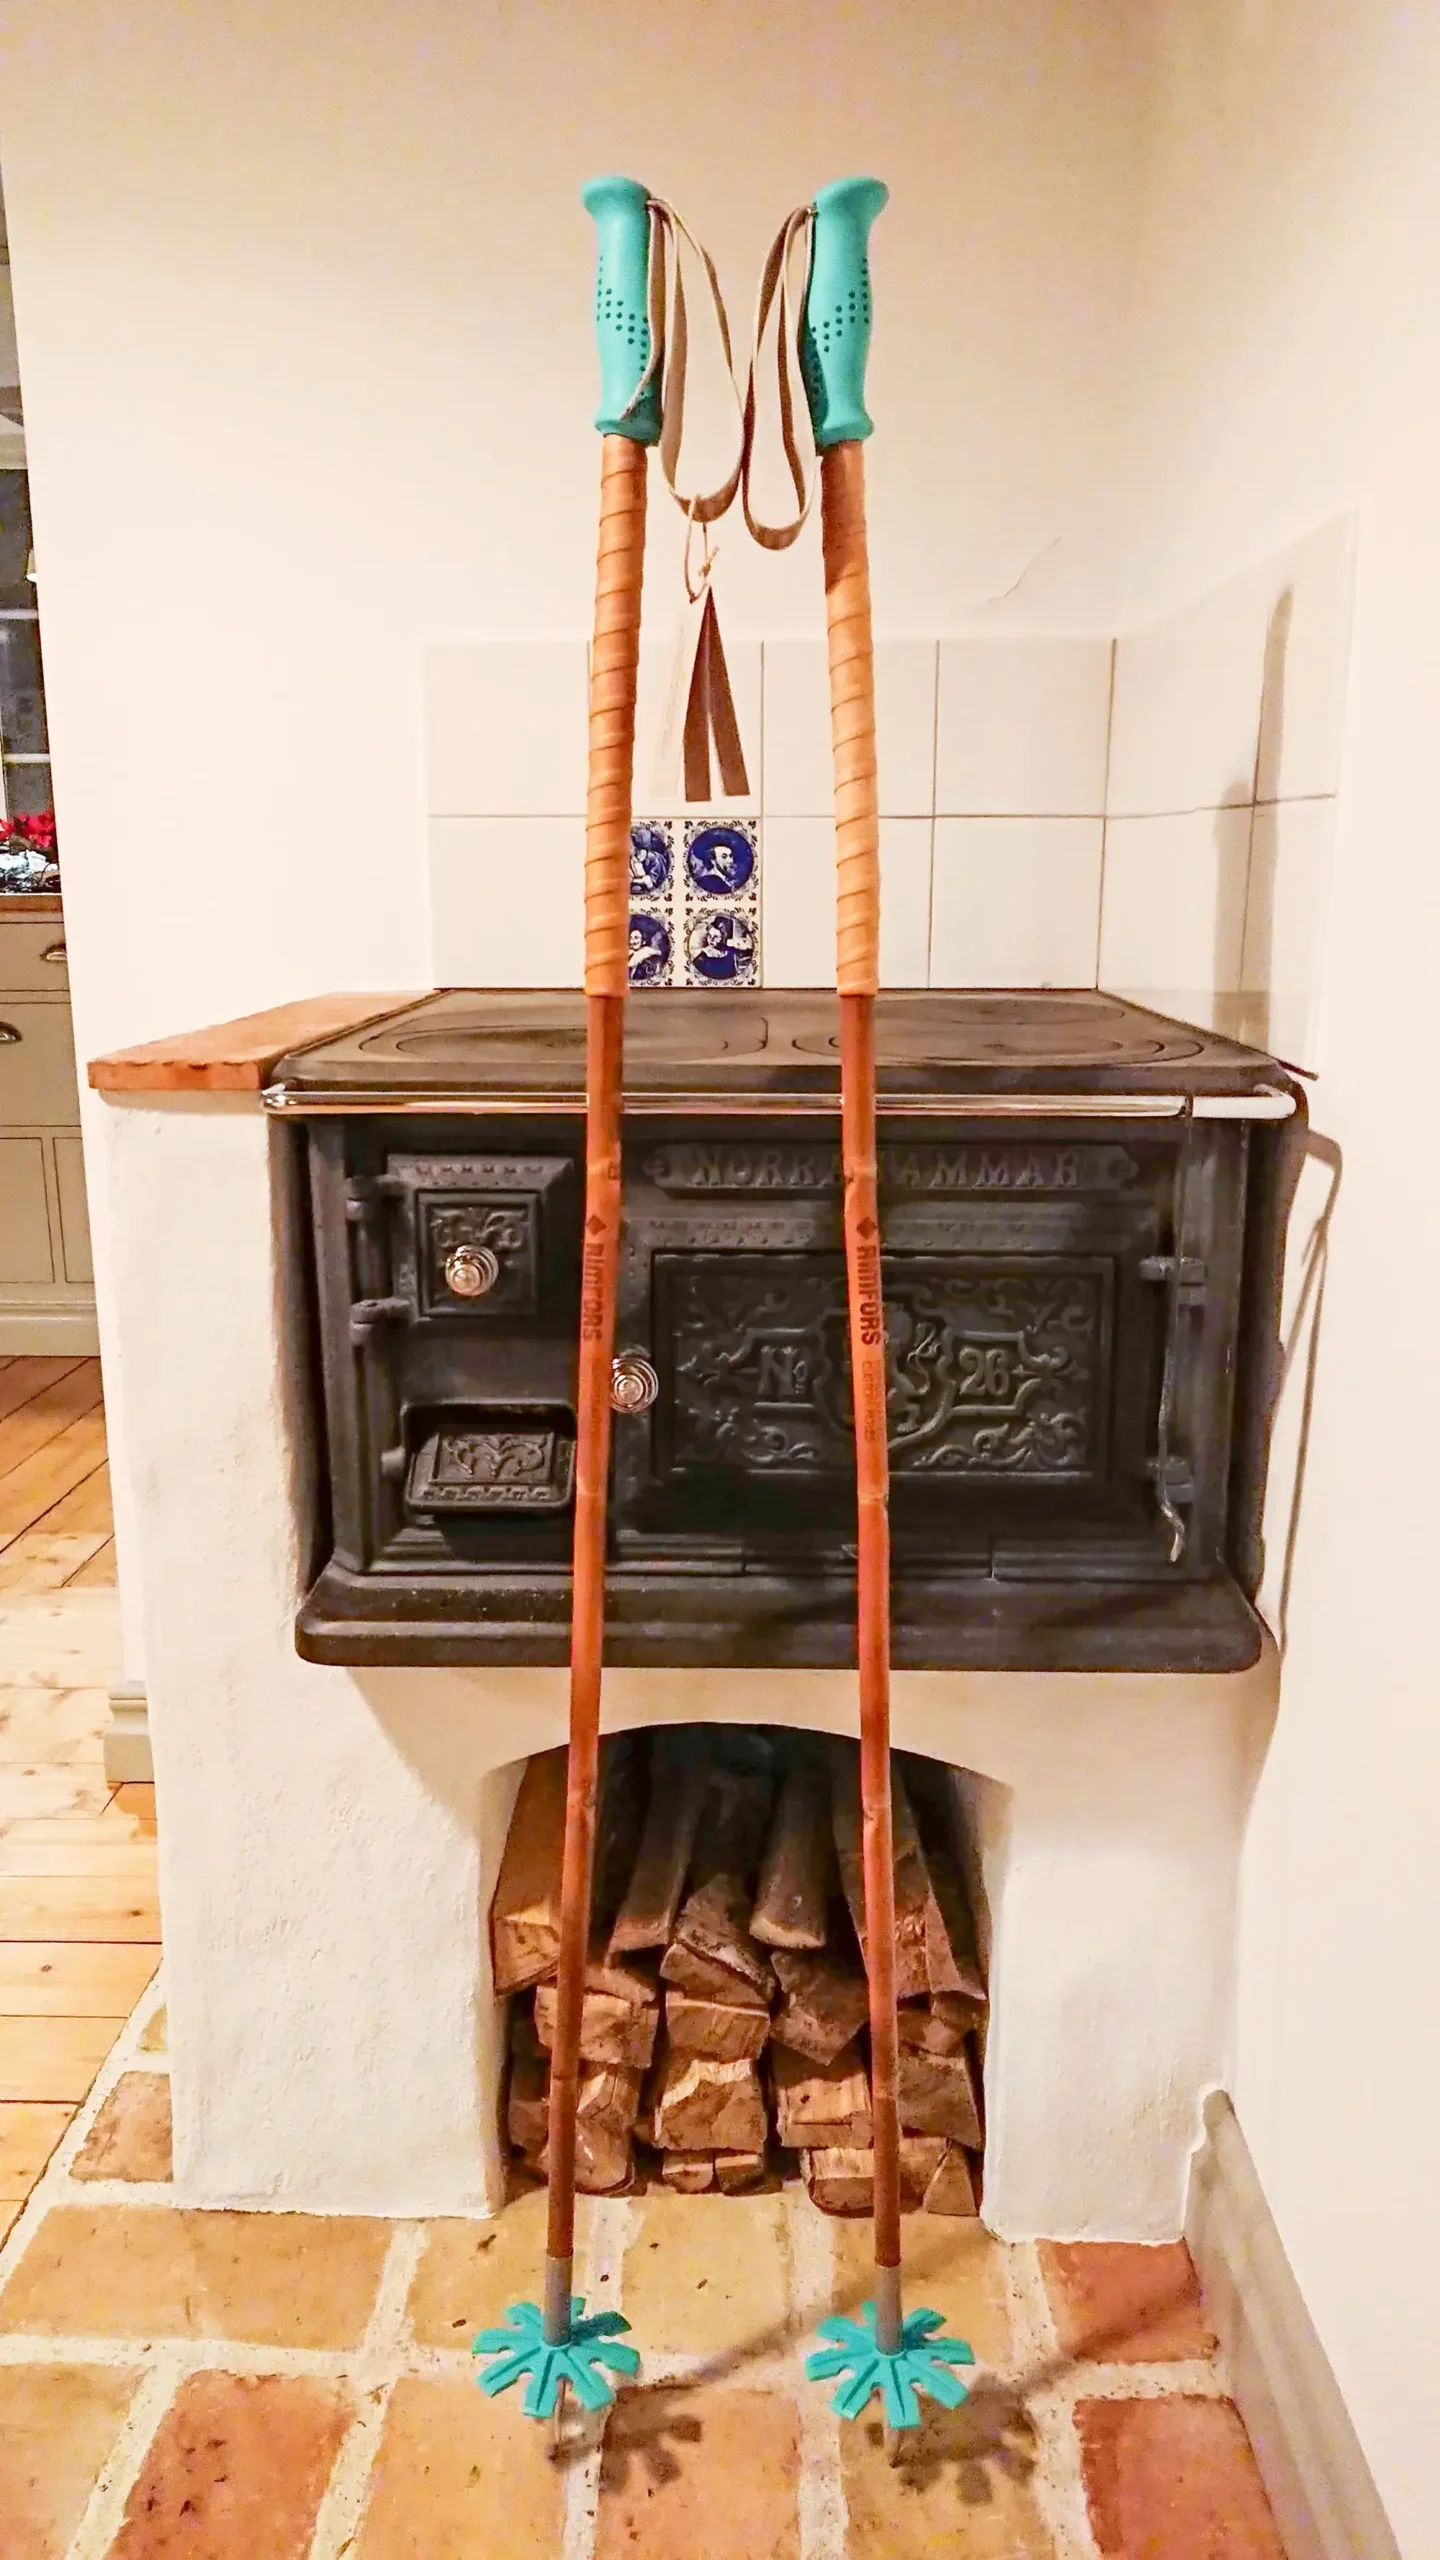 Bamboo ski poles with turquoise grips and baskets in front of a cast iron stove.